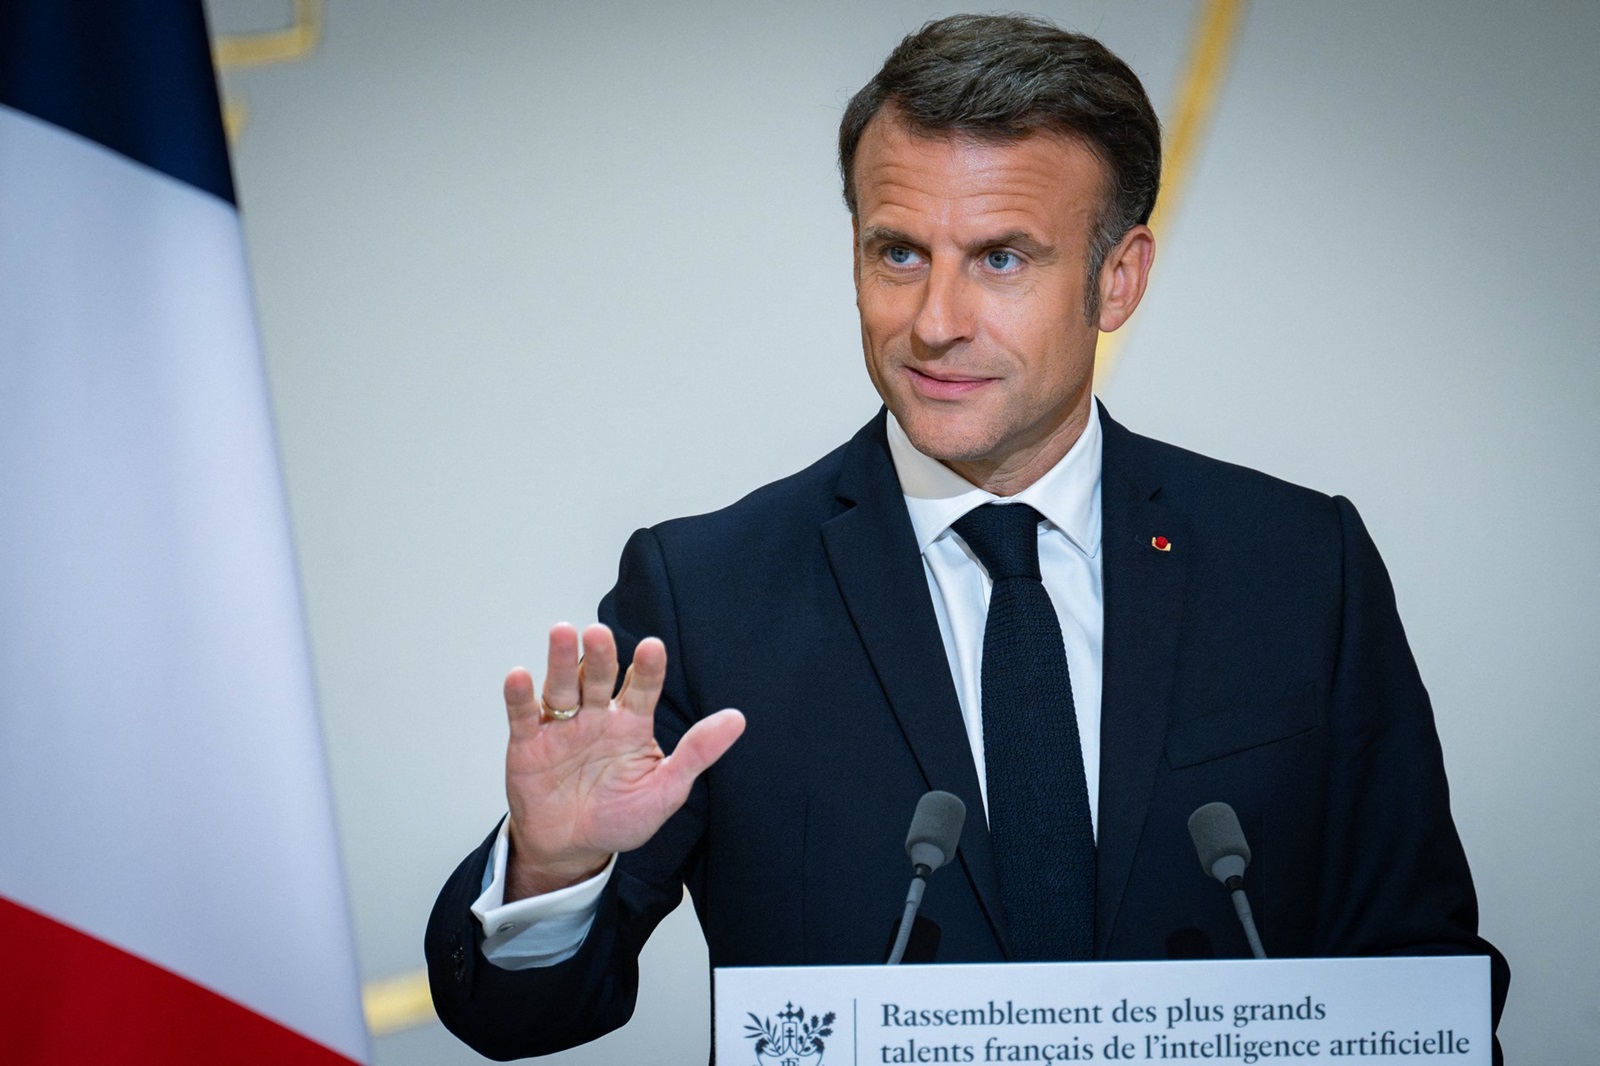 French President Emmanuel Macron speaks during a meeting with members of the artificial intelligence sector as part of a summit on artificial intelligence hosted by France's President at the Elysee Presidential Palace in Paris, France on May 21, 2024.,Image: 875353860, License: Rights-managed, Restrictions: , Model Release: no, Credit line: Tschaen Eric/Pool/ABACA / Abaca Press / Profimedia